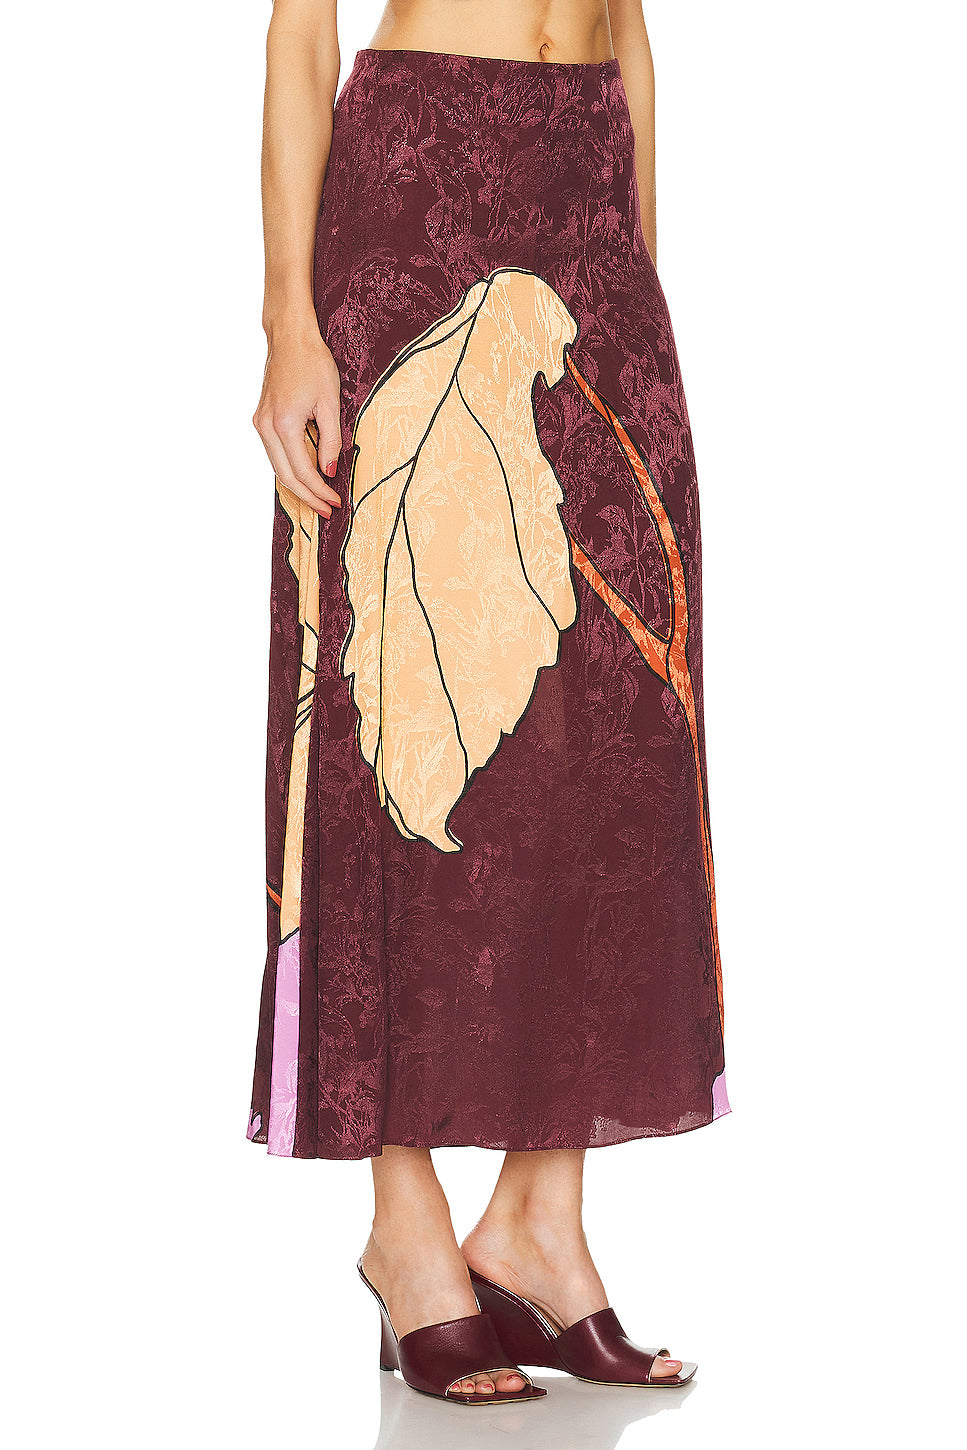 Symphony Of Leaves Ankle Skirt